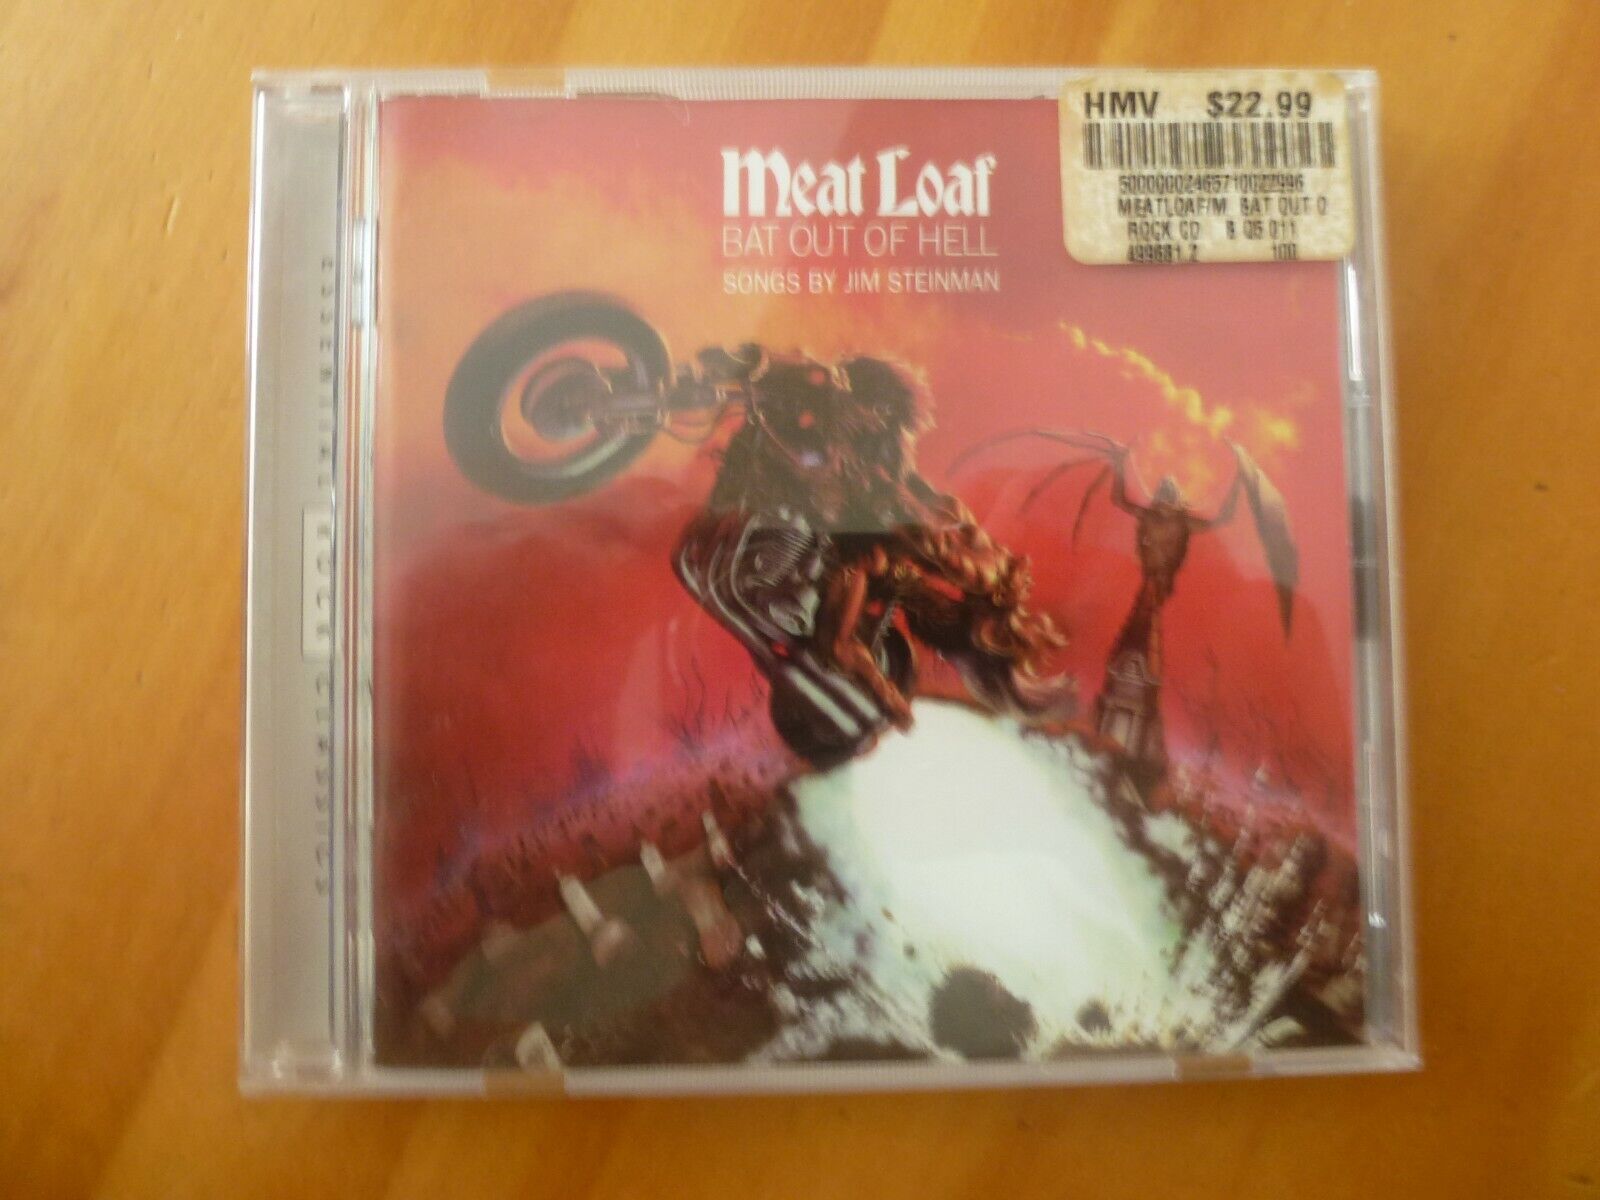 MEAT LOAF - BAT OUT OF HELL  1977 OZ PRESS  9399700079425 NM CD